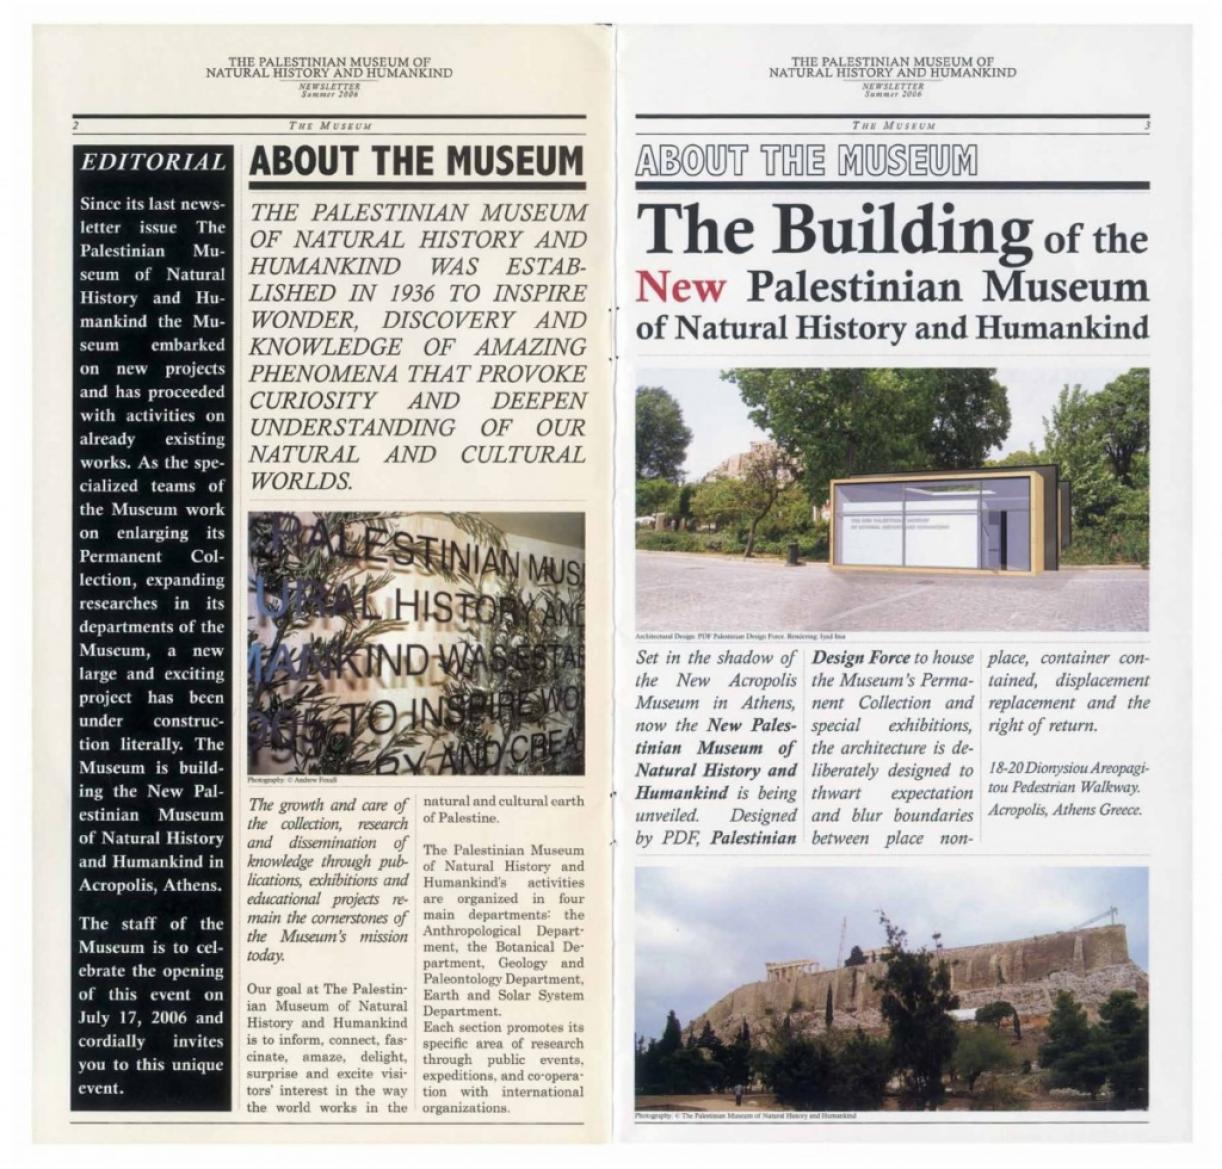 The Palestinian Museum of Natural History and Humankind, Newsletter, Summer 2006